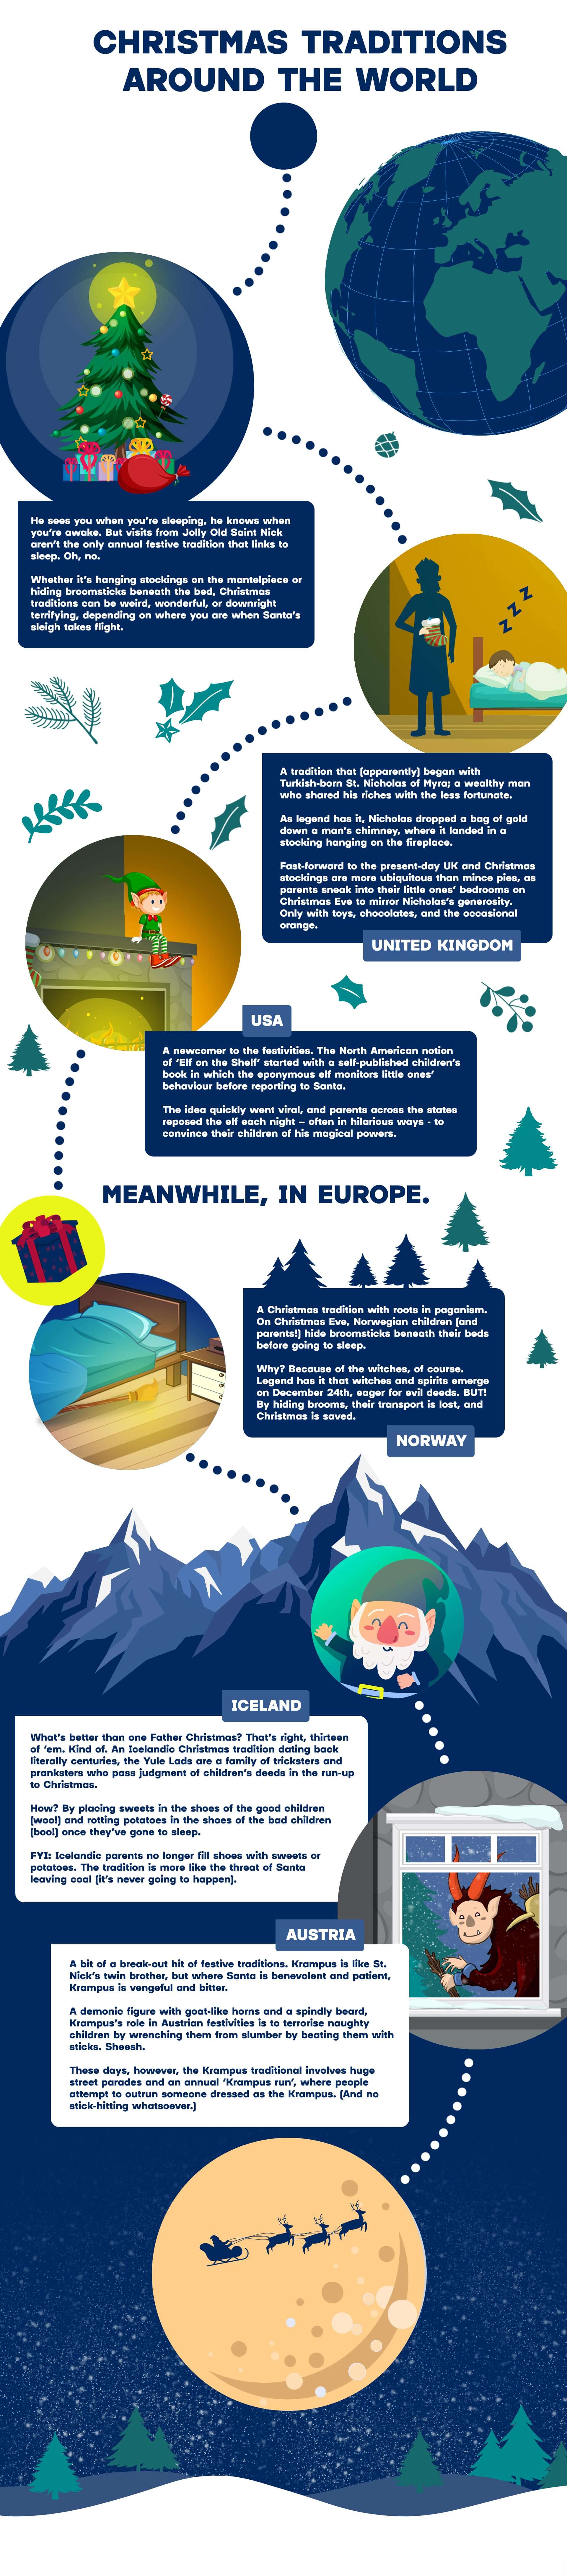 Infographic detailing various Christmas traditions around the world